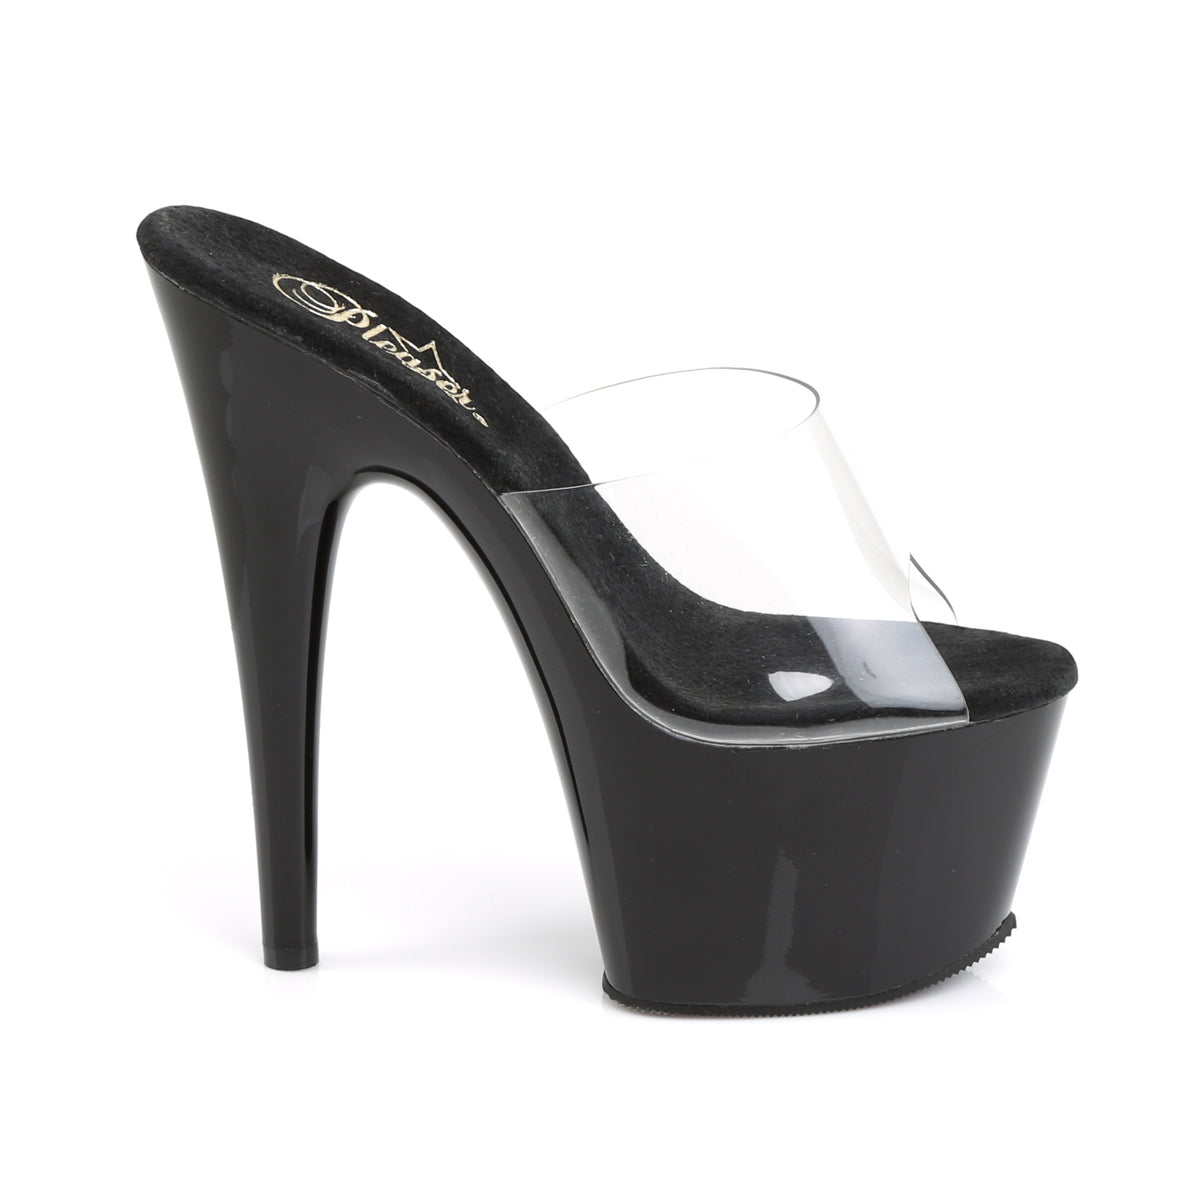 ADORE-701/C/B 7" PLEASER FAST DELIVERY 24-48h